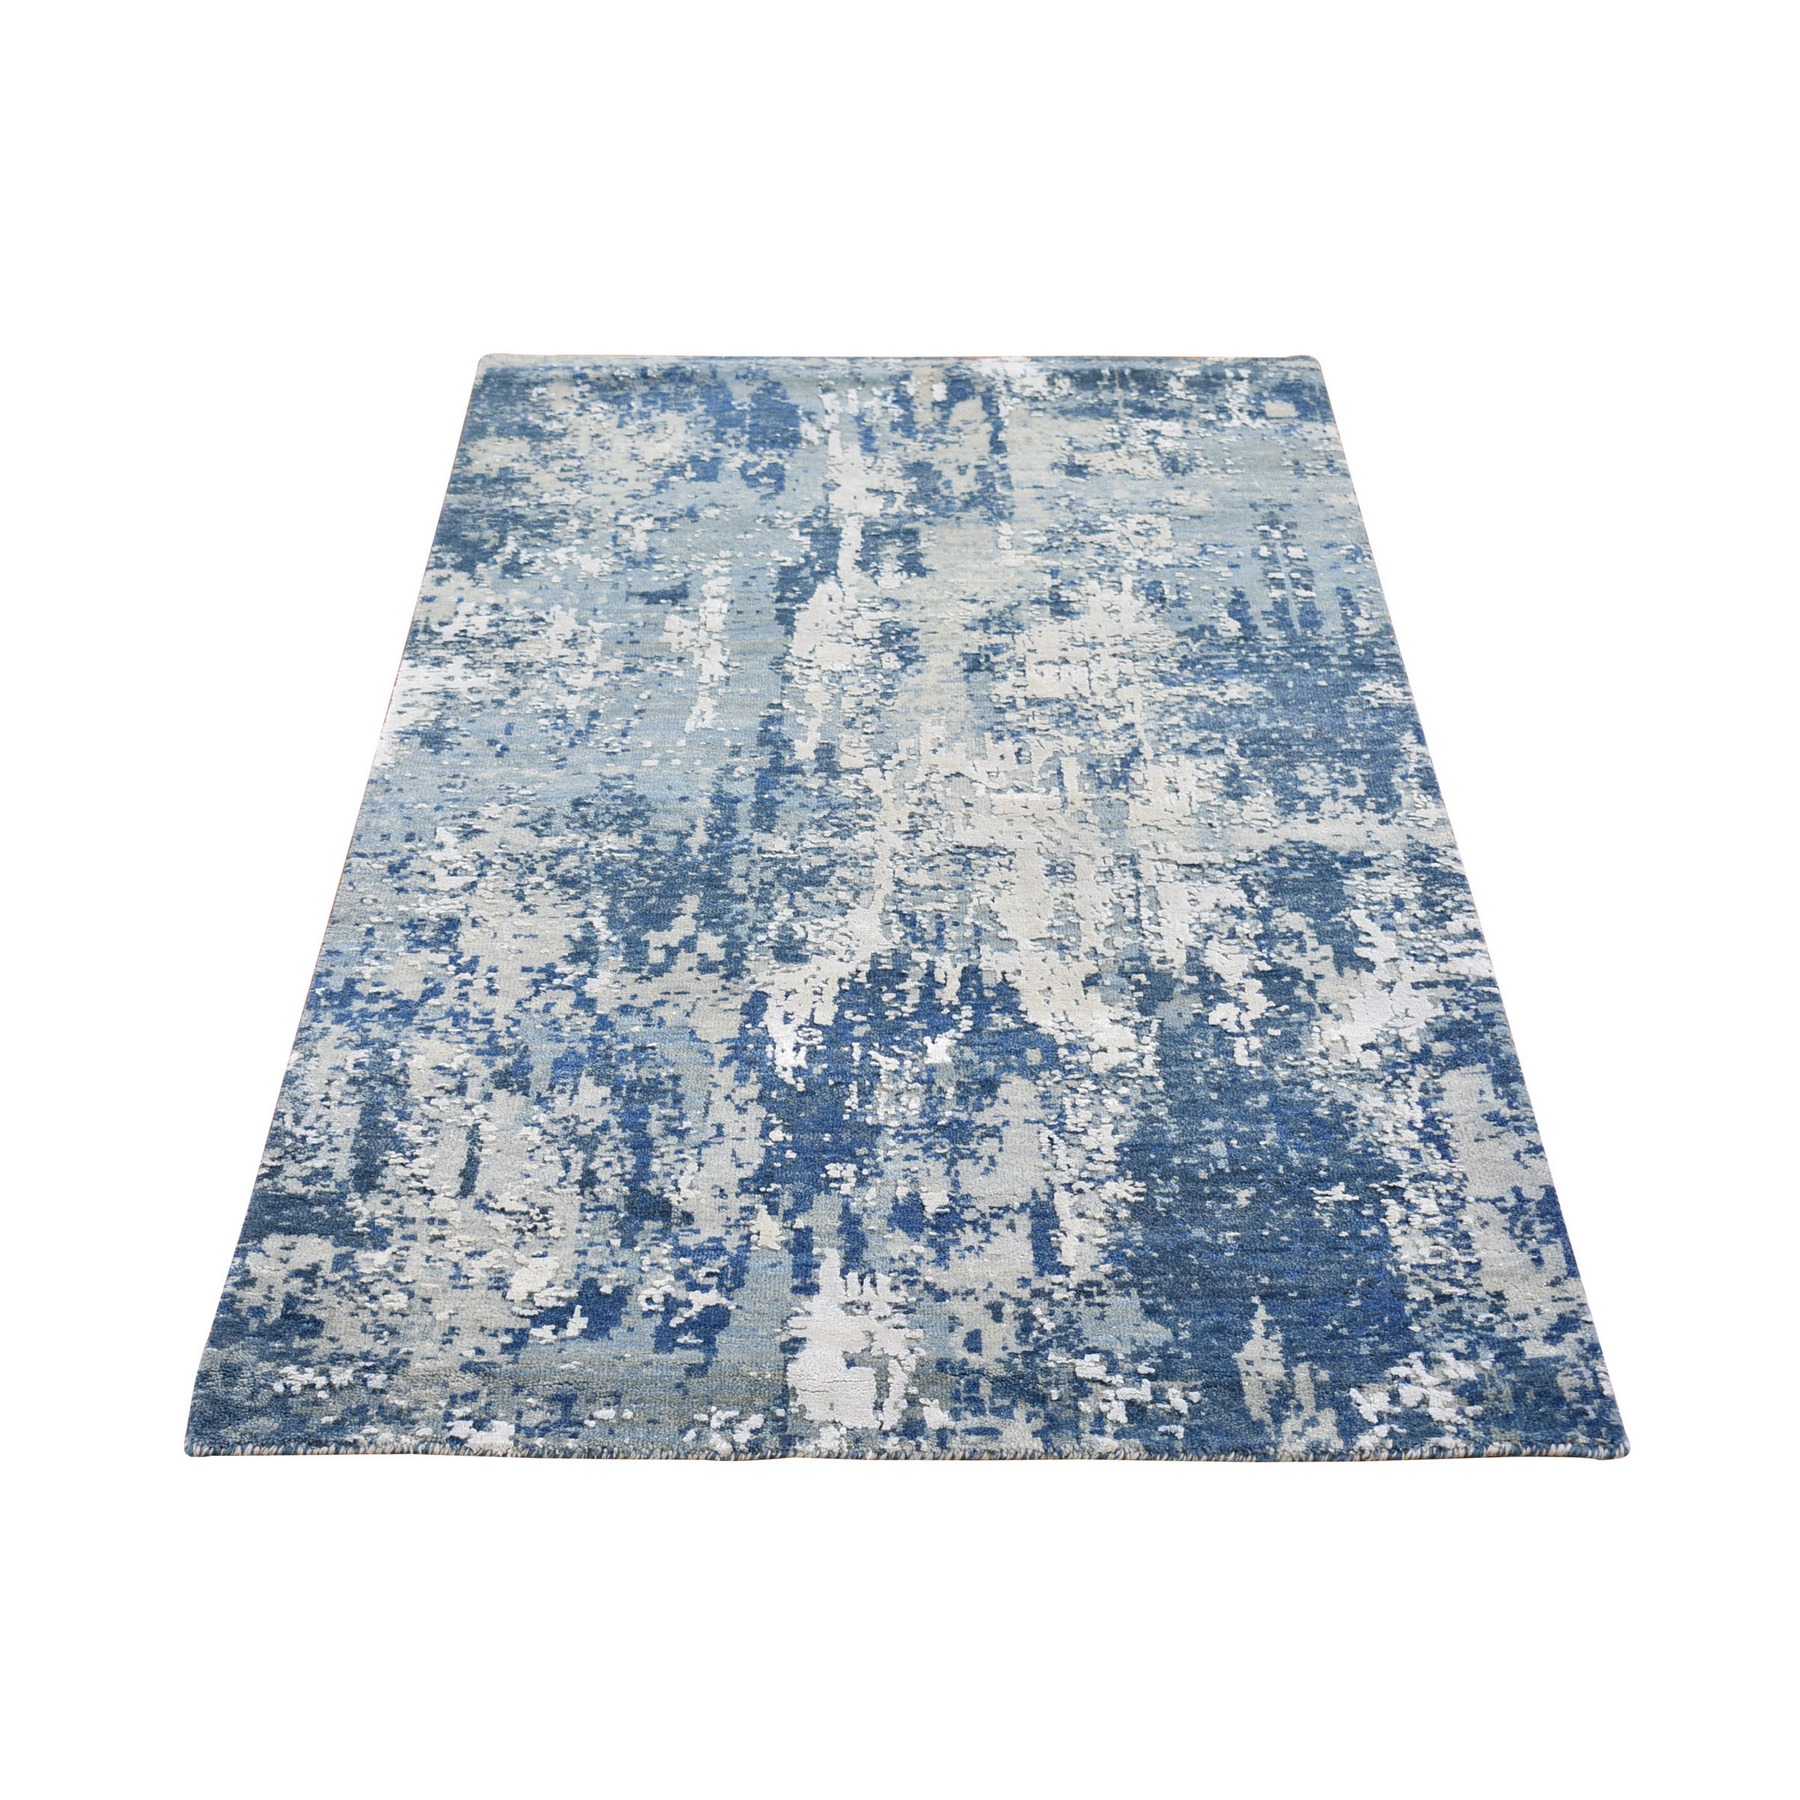 Mid Century Modern Collection Hand Knotted Blue Rug No: 1133540